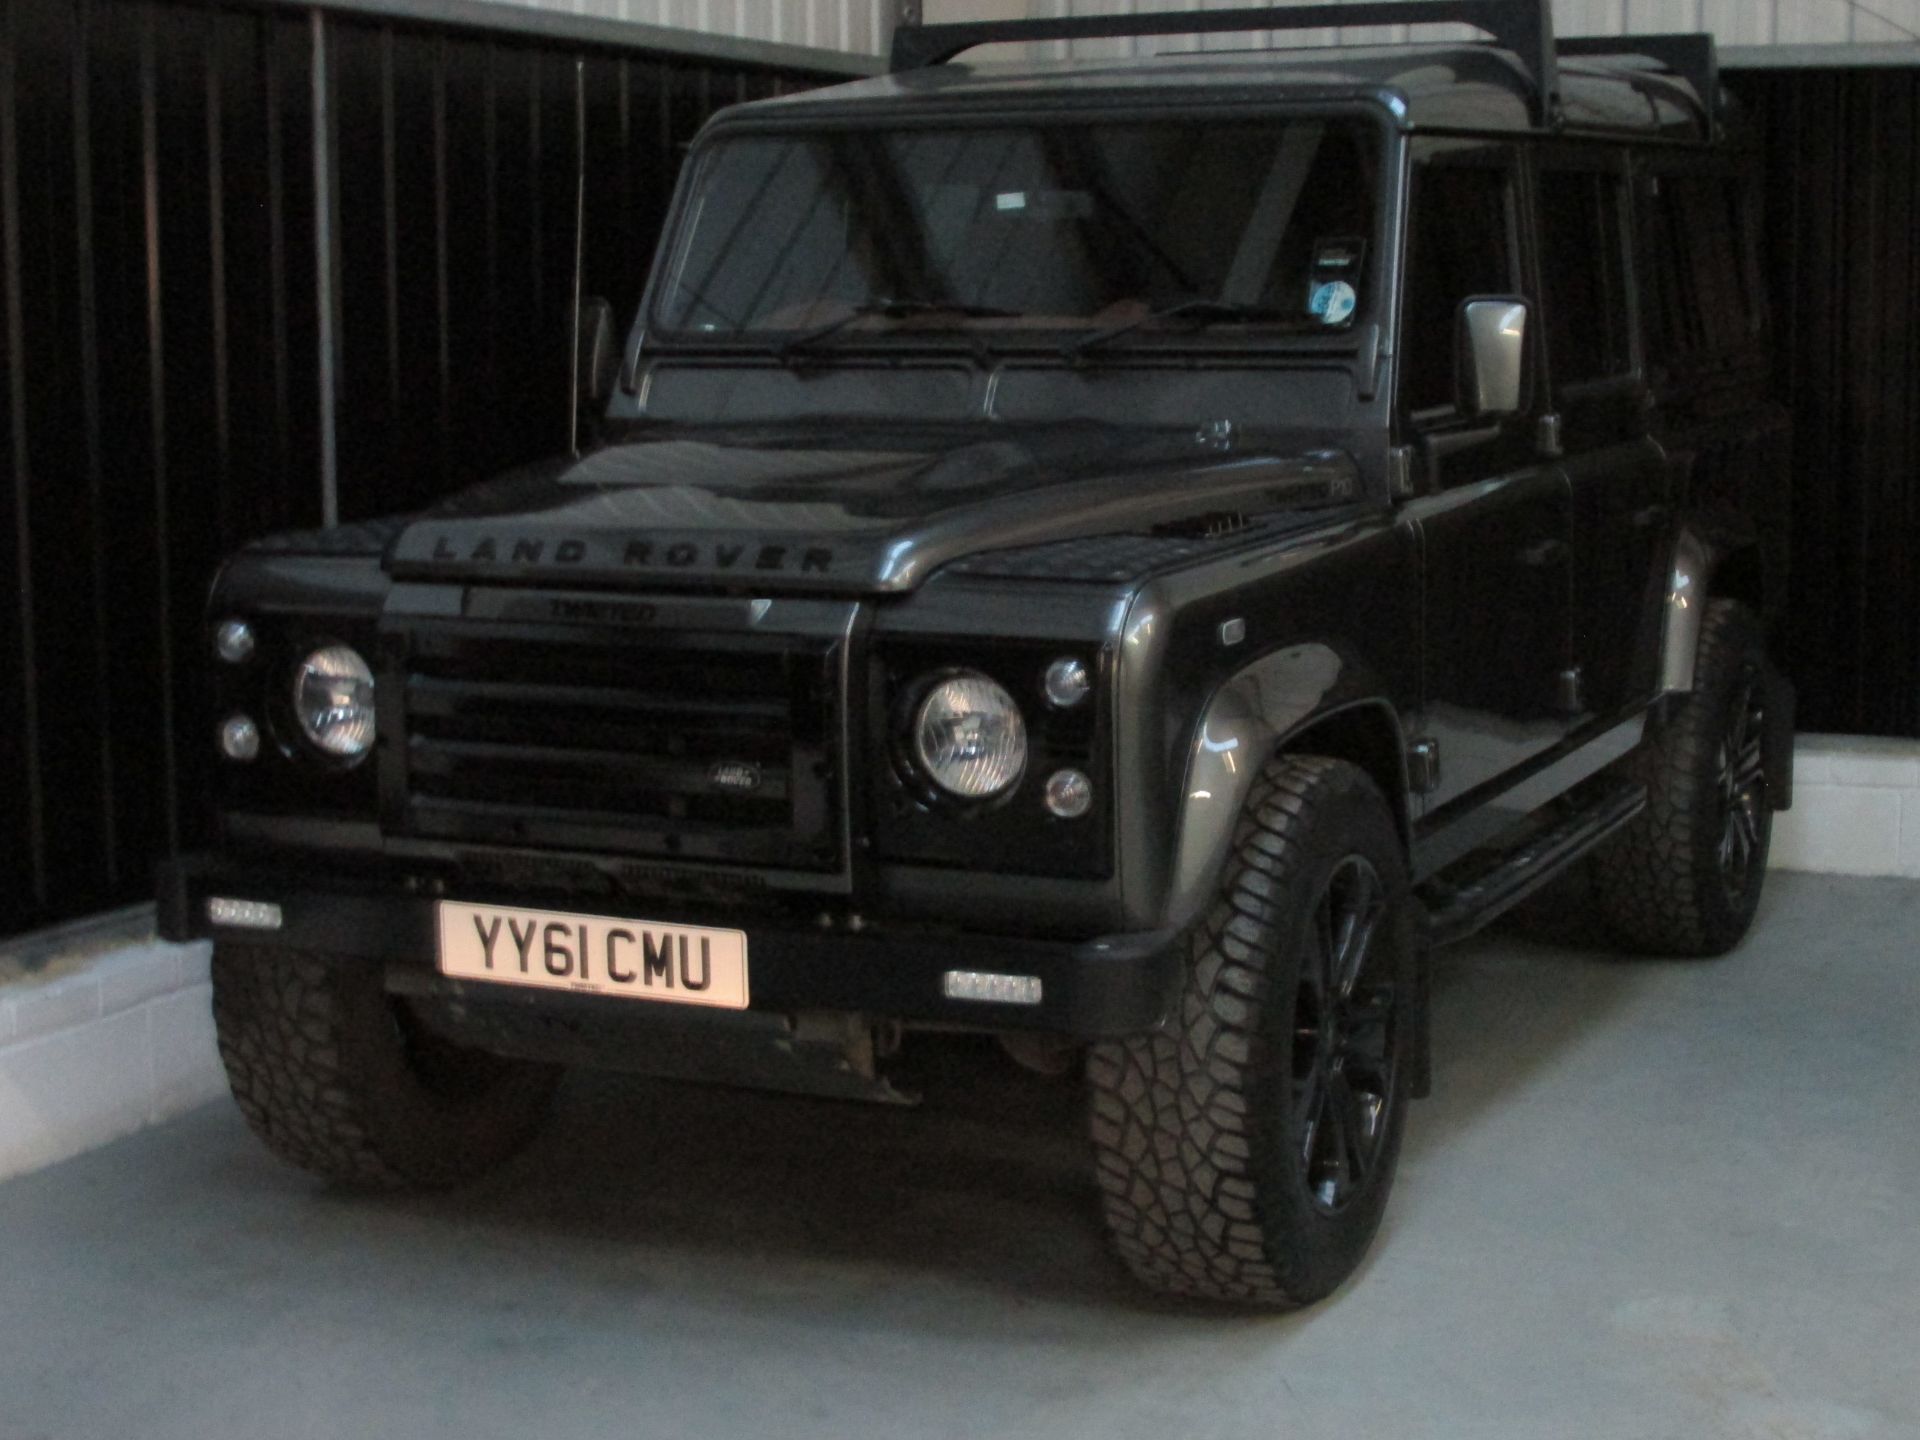 'TWISTED' - Rare Land Rover Defender Genuine PS 10 Built by Twisted Yorkshire - Image 23 of 50